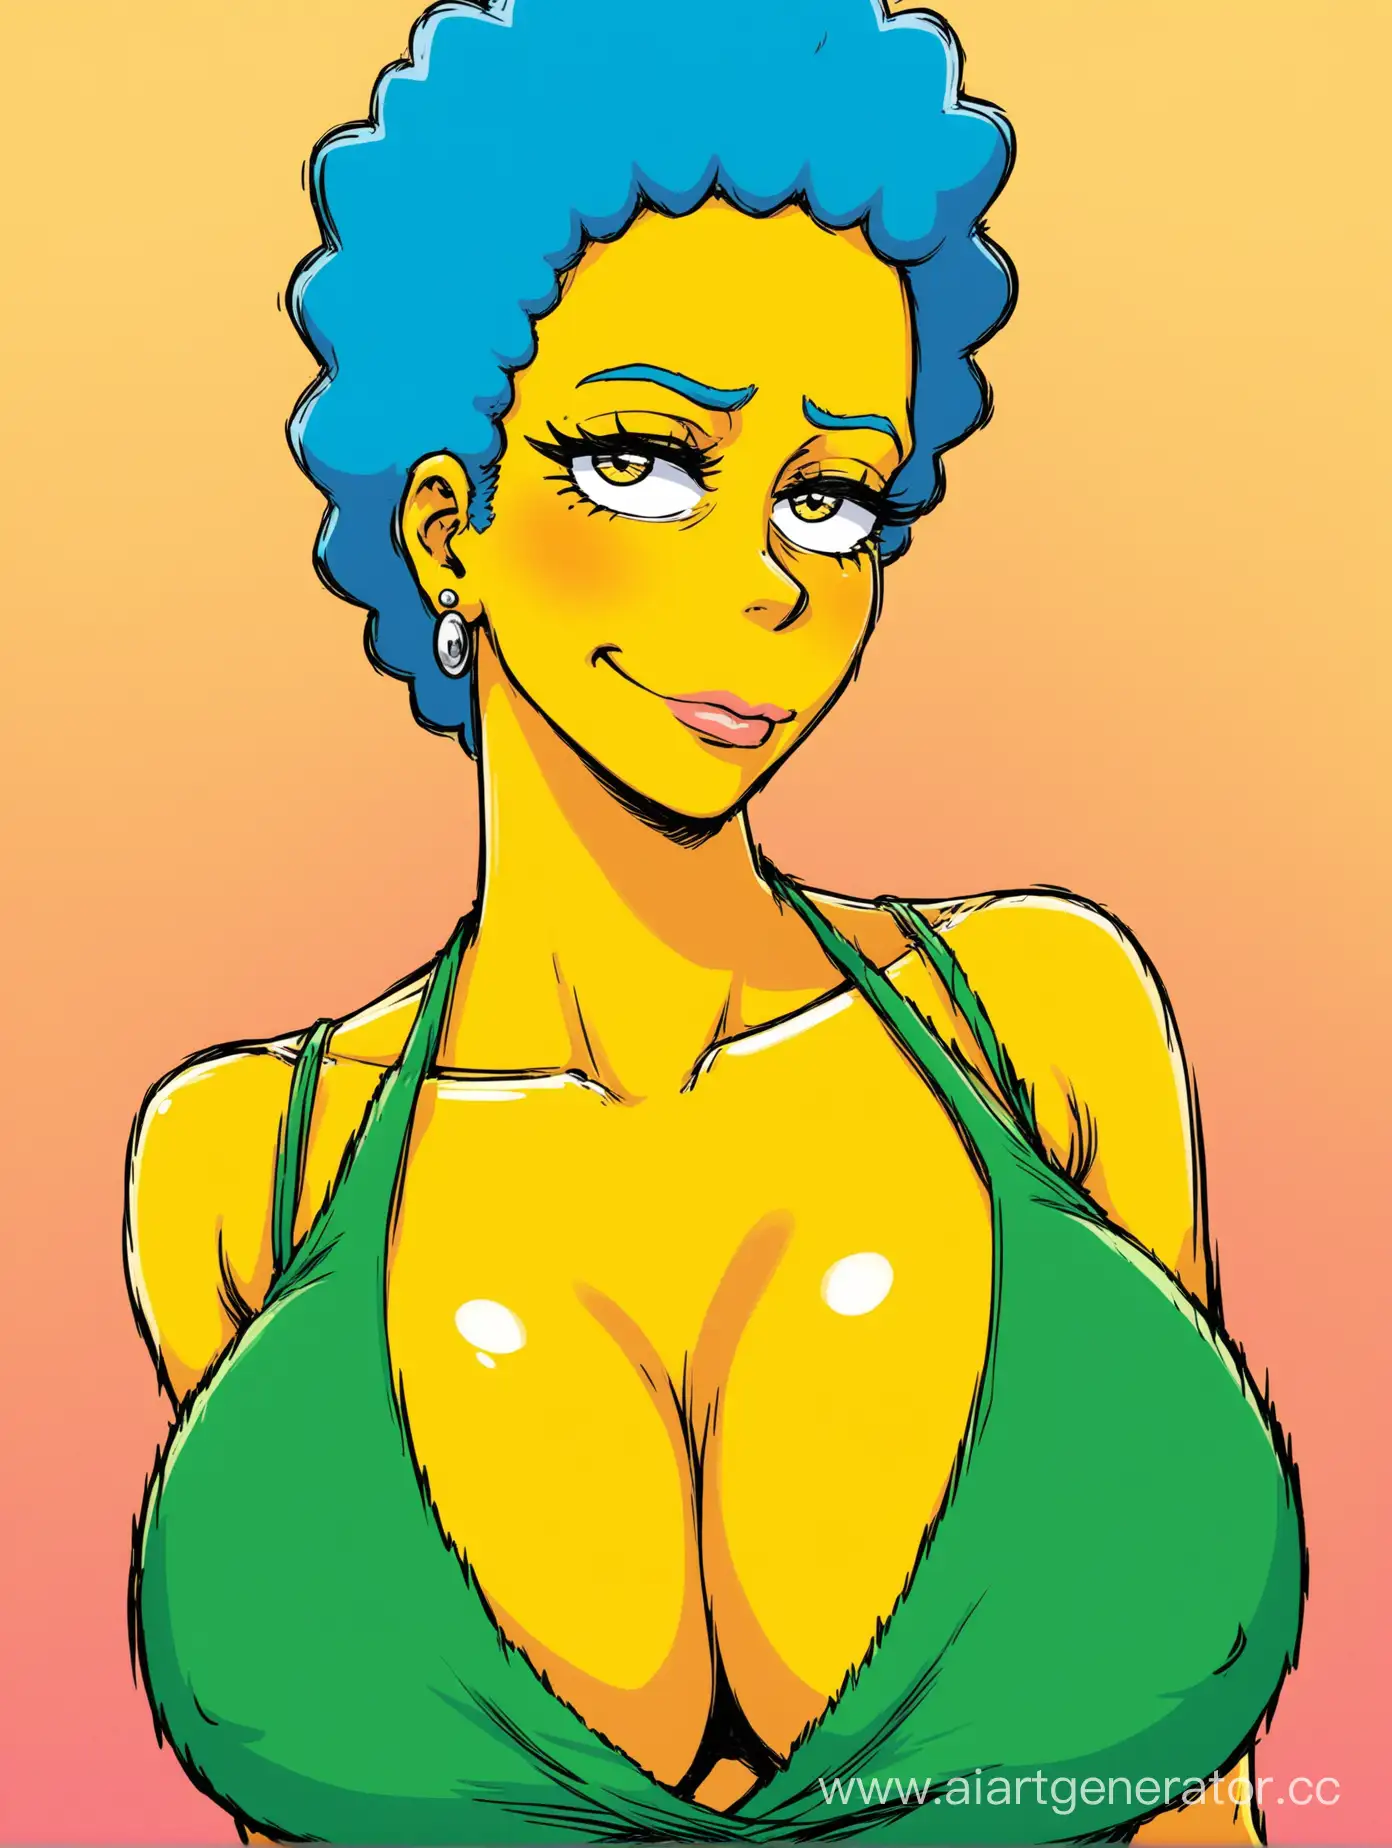 Intimate-ComicStyle-Portrait-of-Marge-Simpson-with-Iconic-Yellow-Skin-and-Green-Dress